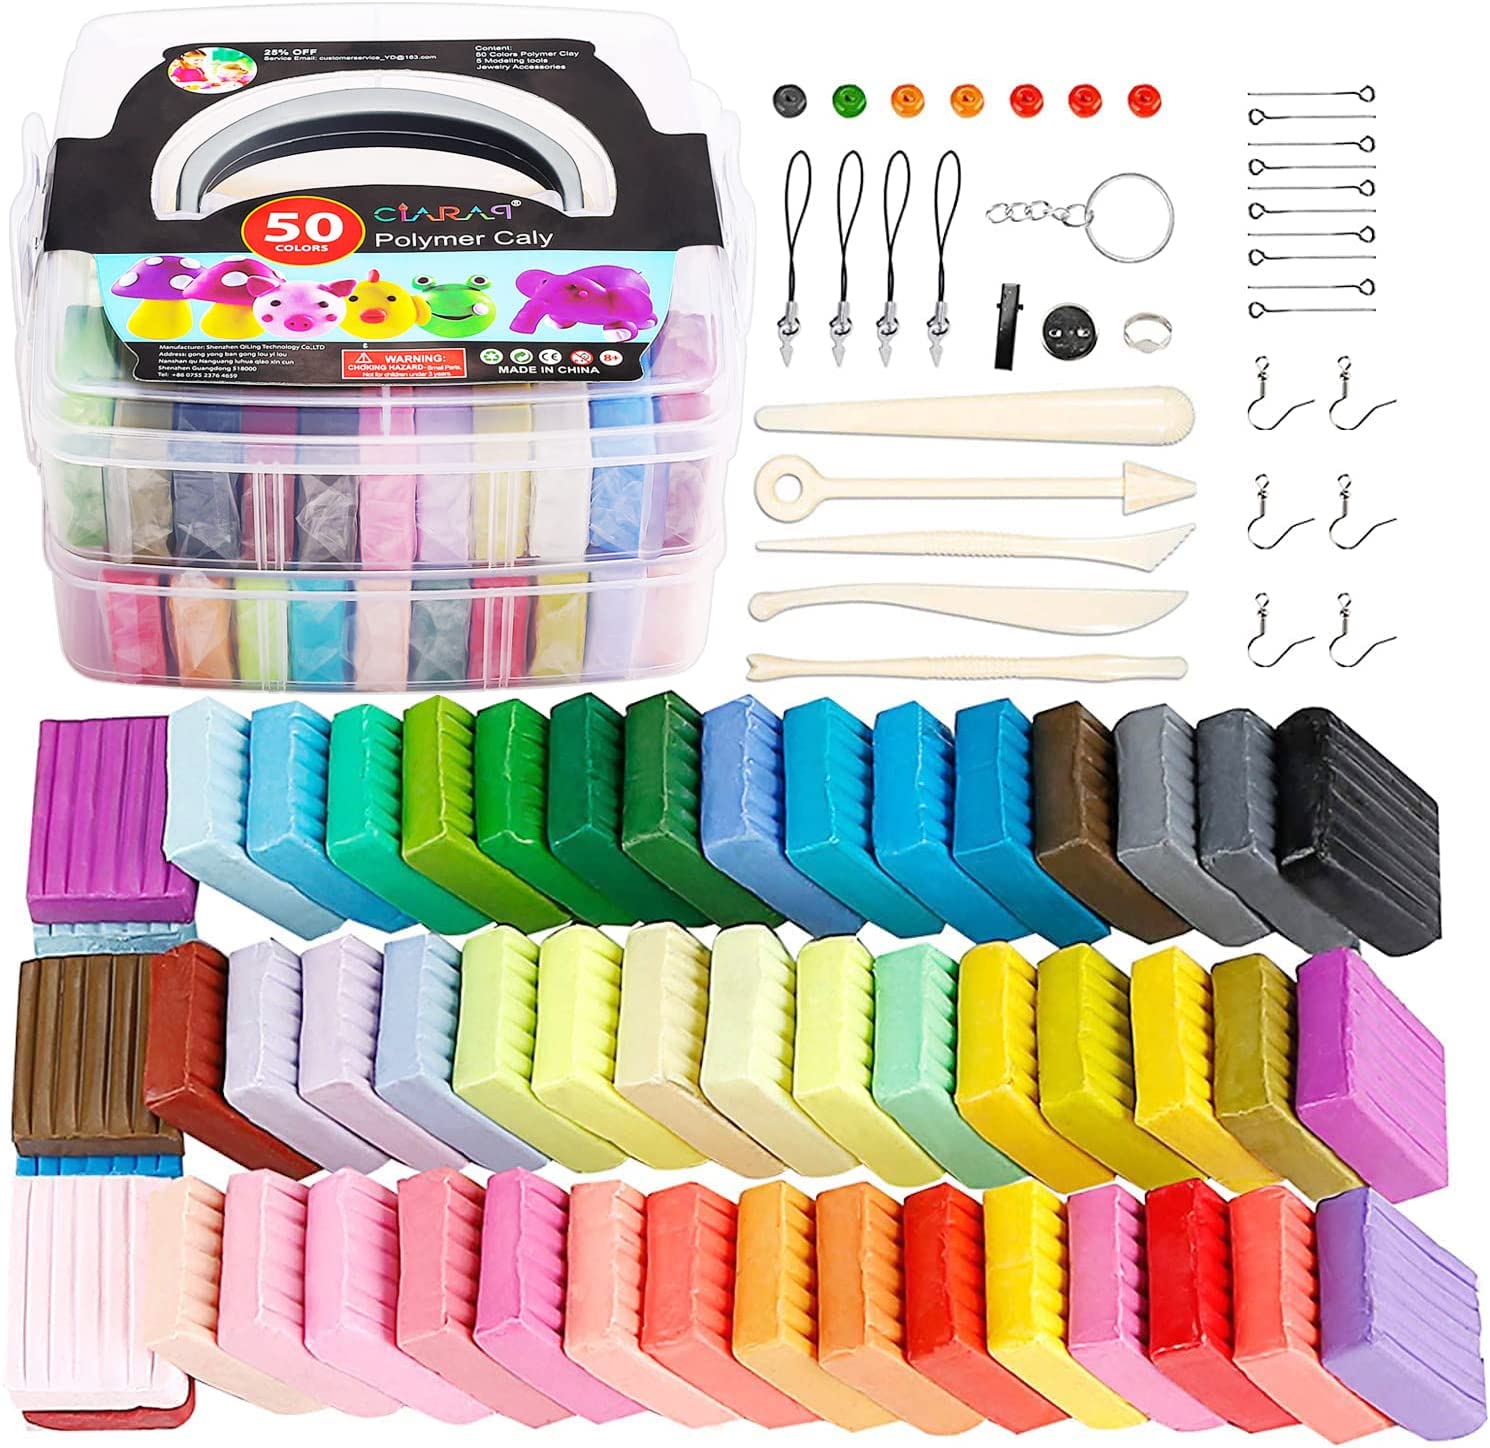 79 Piece Polymer Clay Starter Kit, Oven Bake Modeling Clay with Sculpting  Tools, Earring Making Kit, 50 Colors 